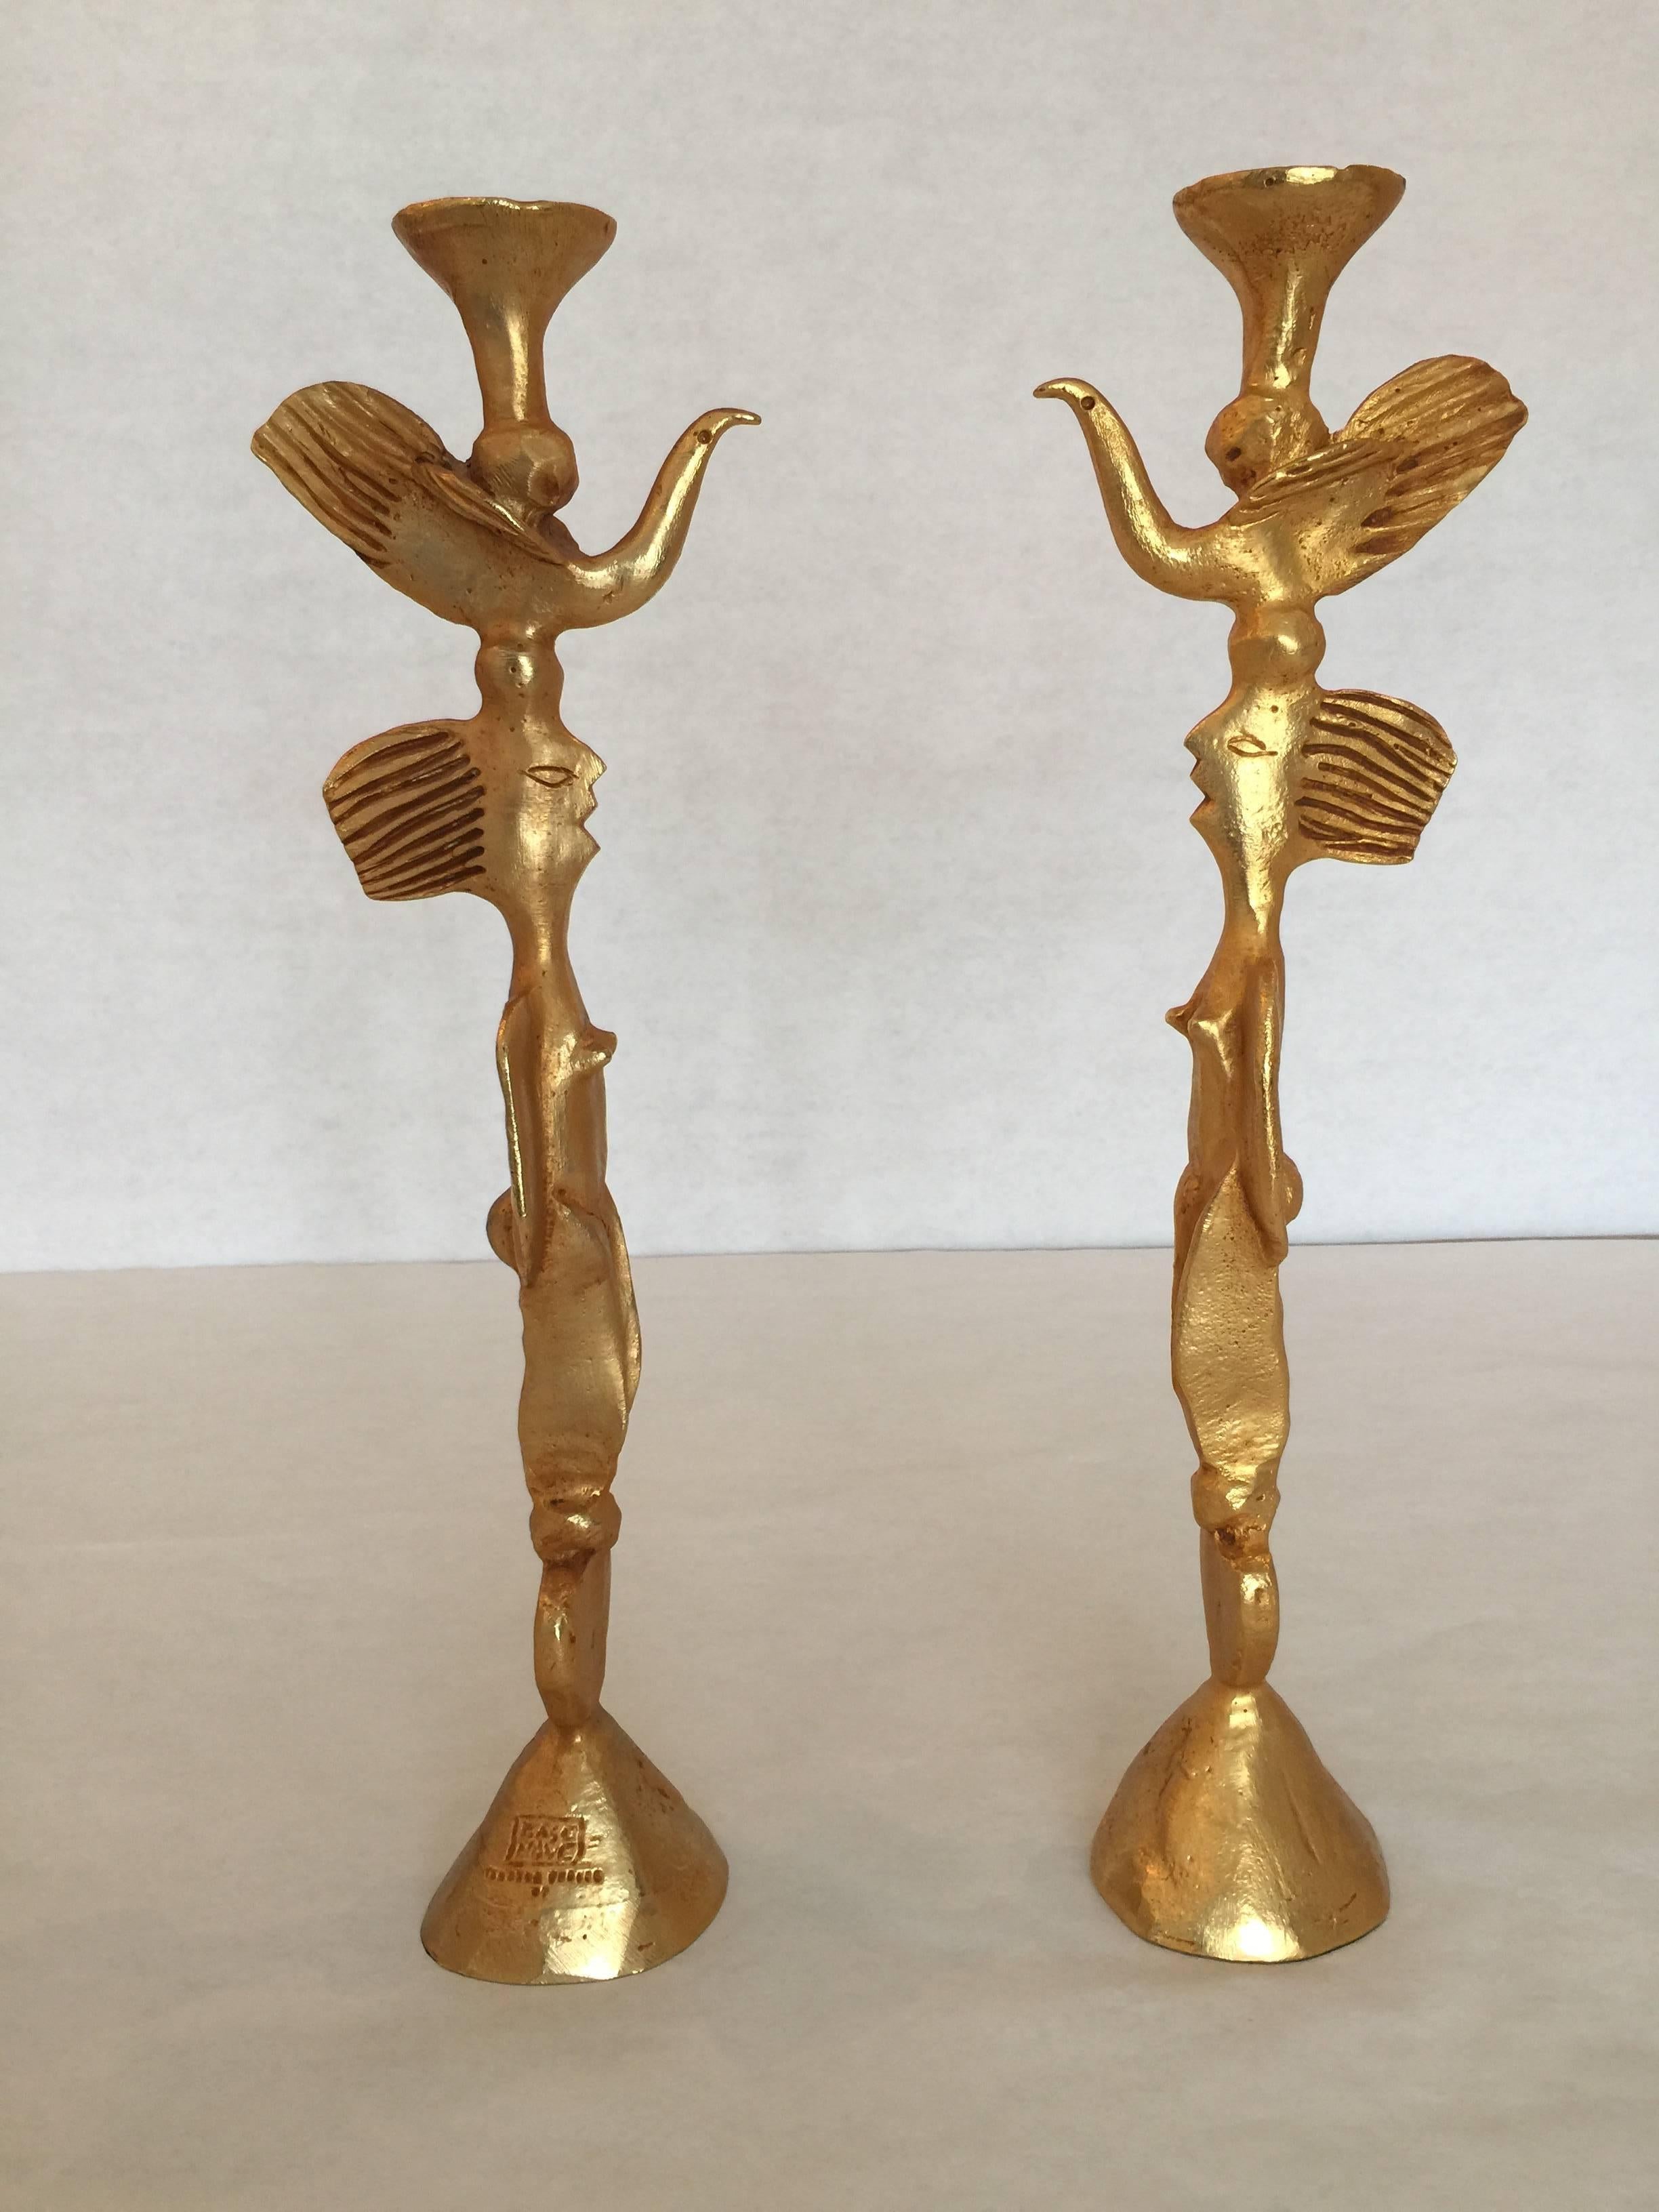 French Pair of Gilt Bronze Candleholders by Pierre Casenove for Fondica